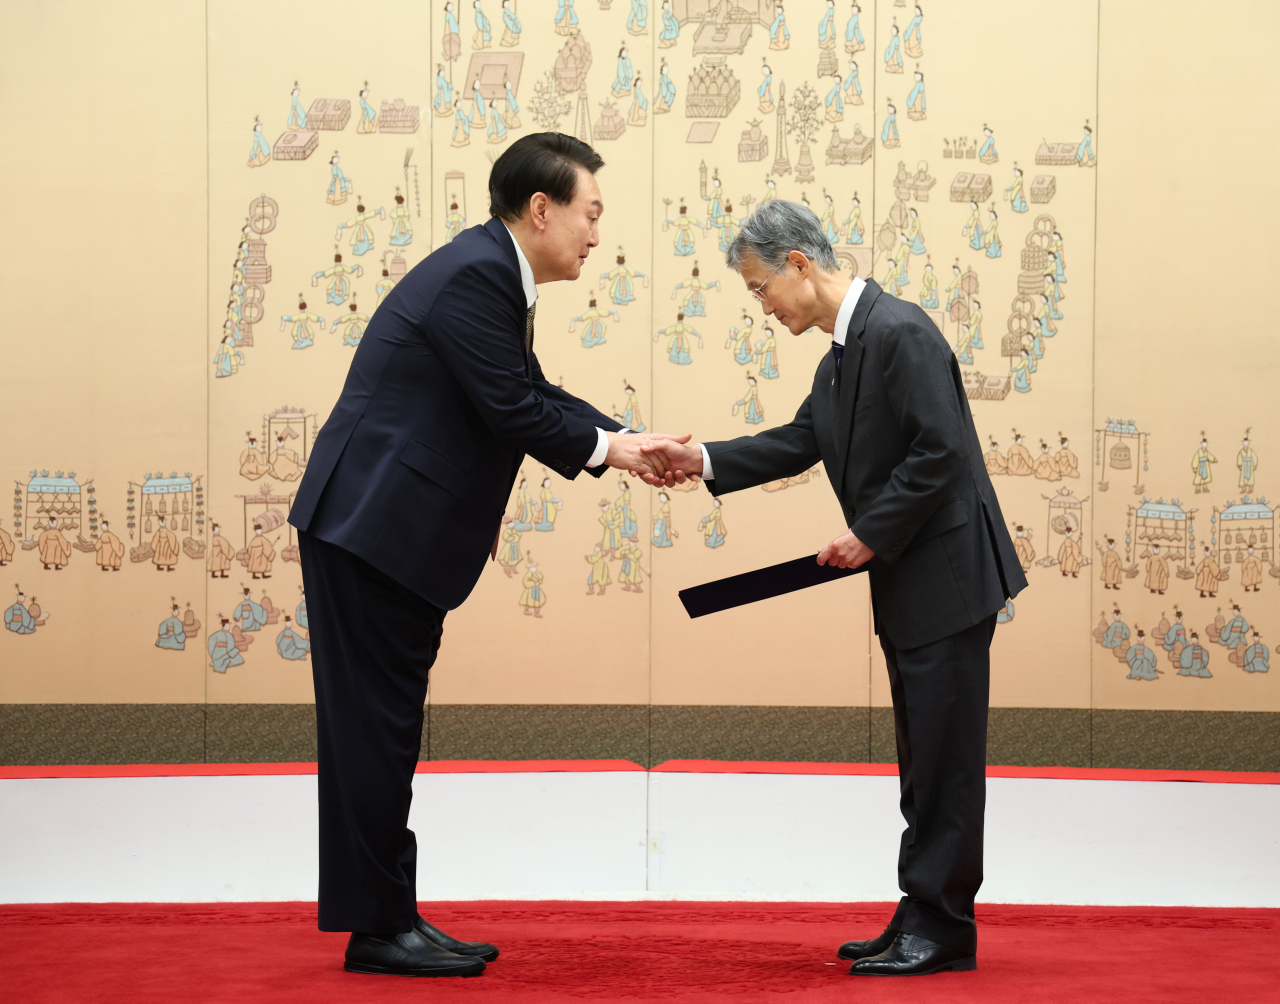 President Yoon Suk Yeol (left) shakes hands with Chief Justice nominee Cho Hee-dae at the celebration of Cho's confirmation at the presidential office on Friday. (Yonhap)